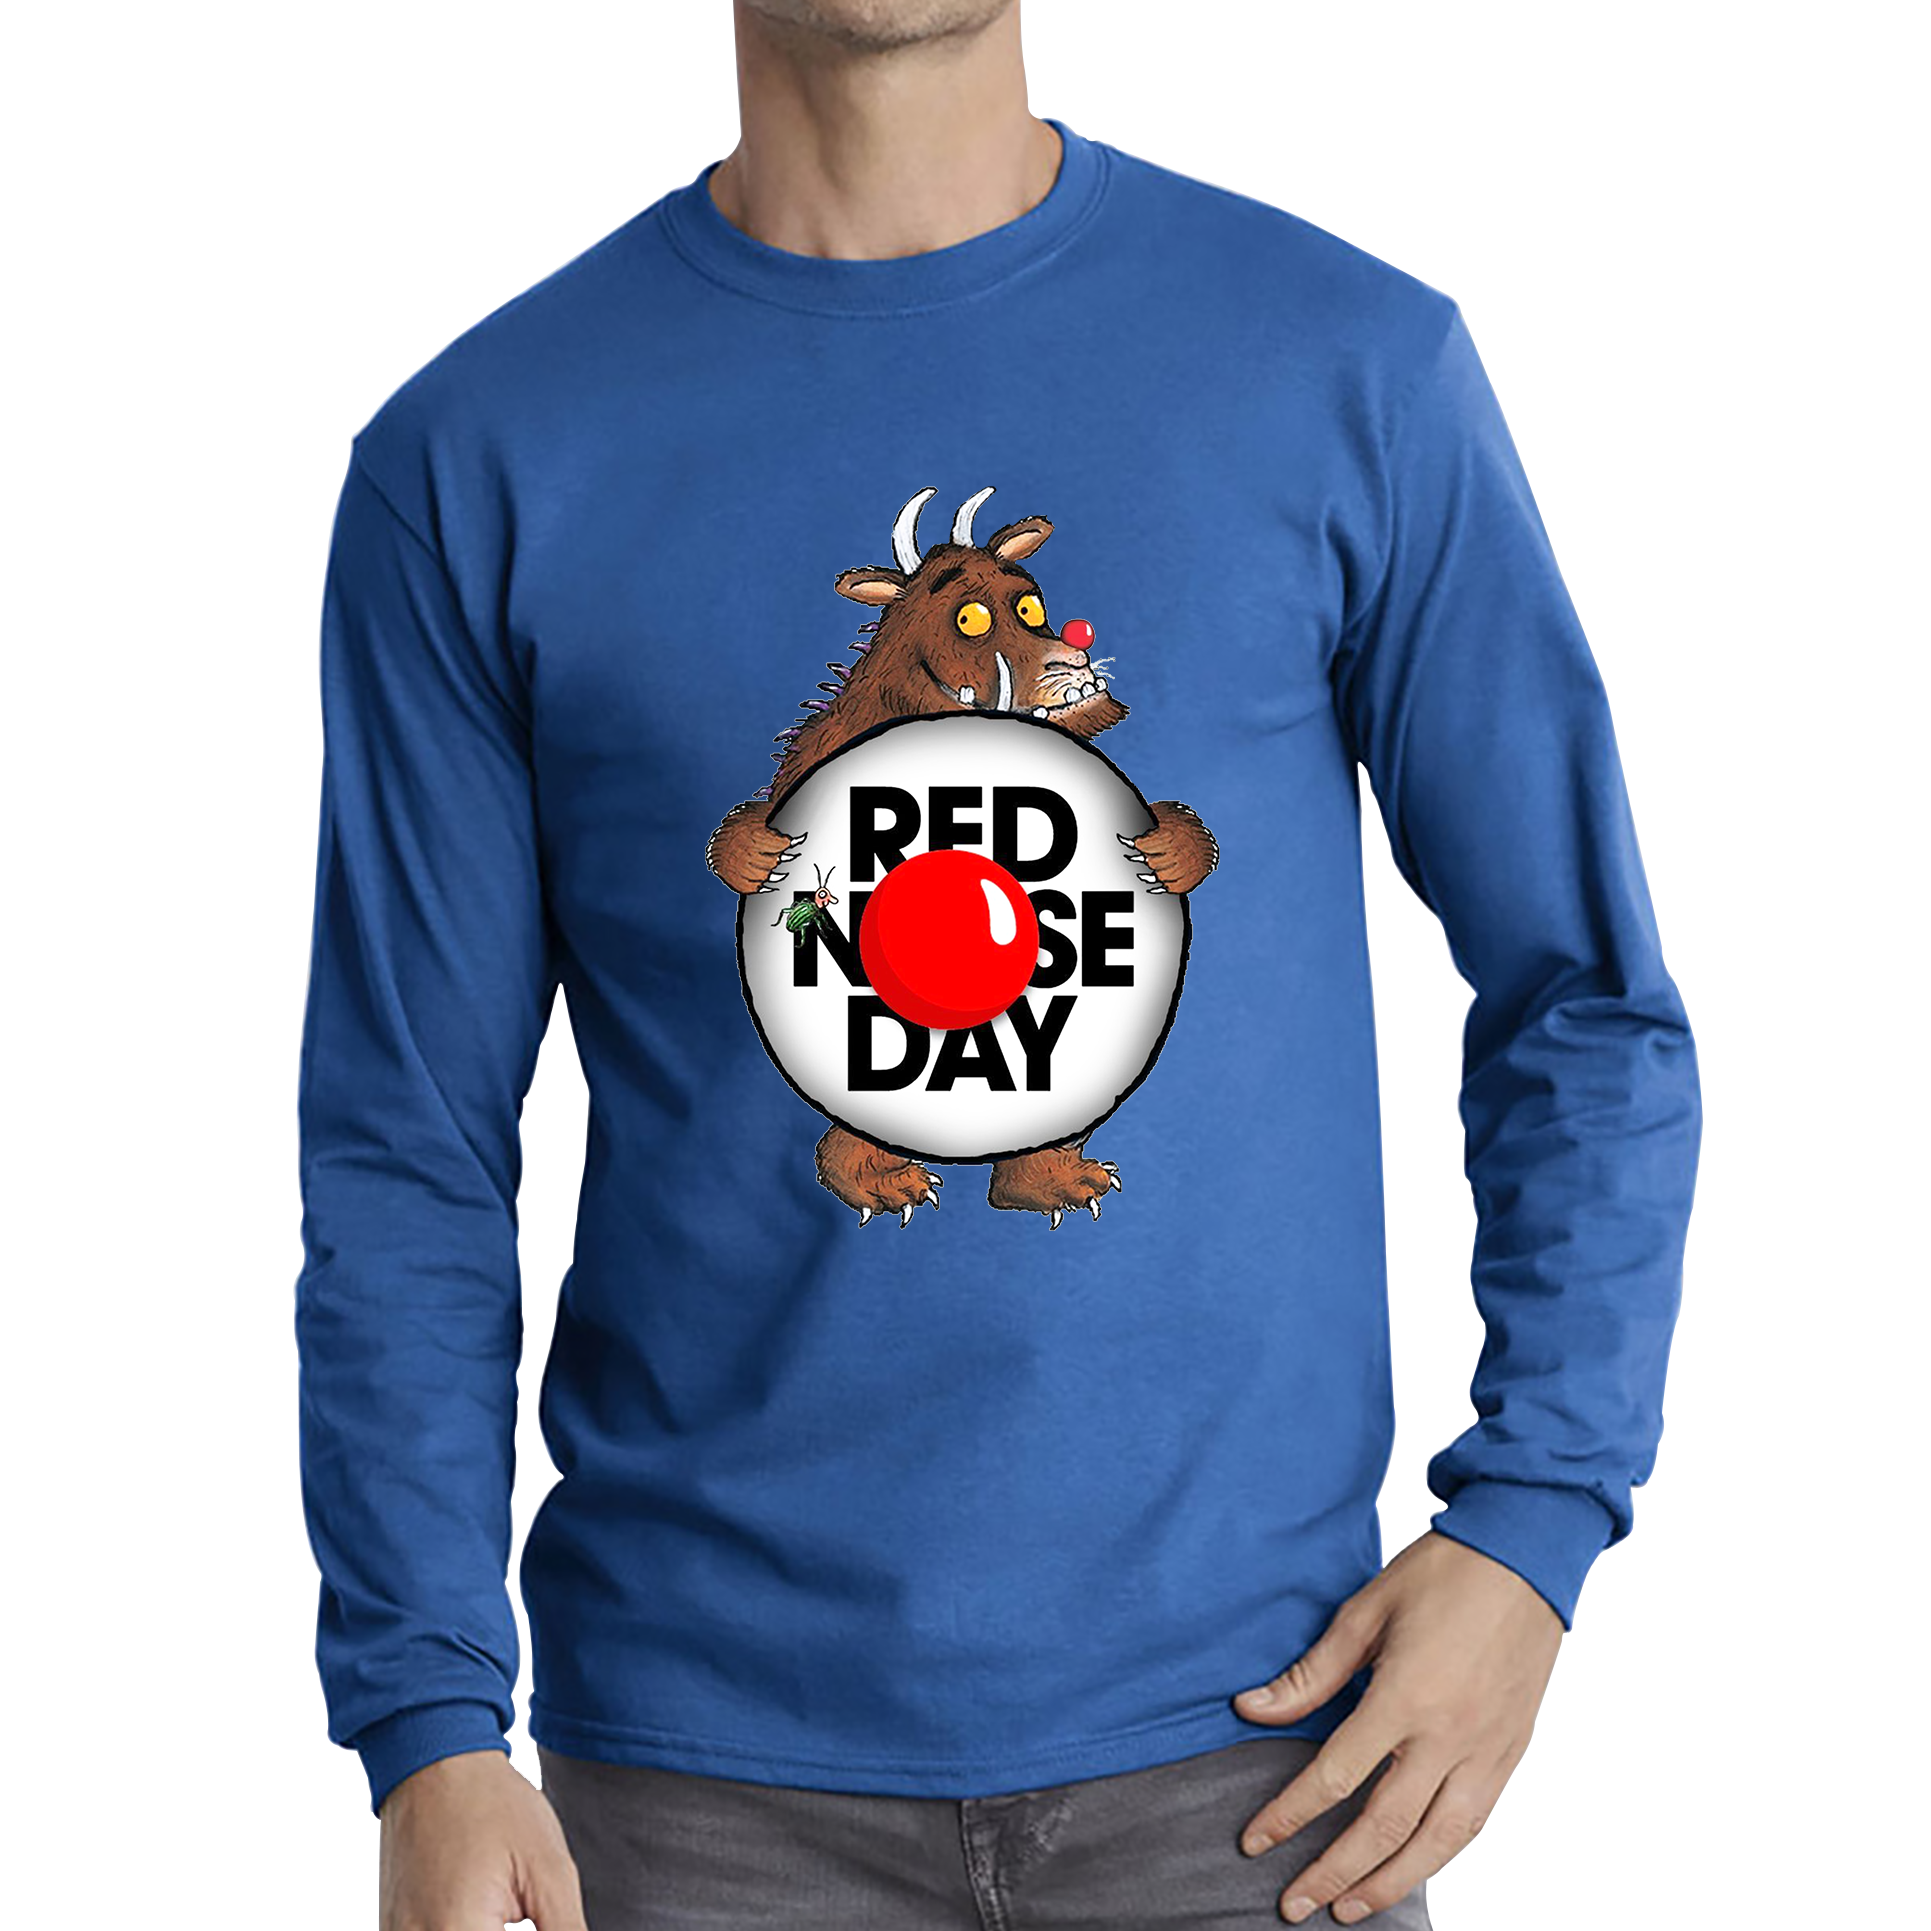 The Gruffalo Red Nose Day Adult Long Sleeve T Shirt. 50% Goes To Charity